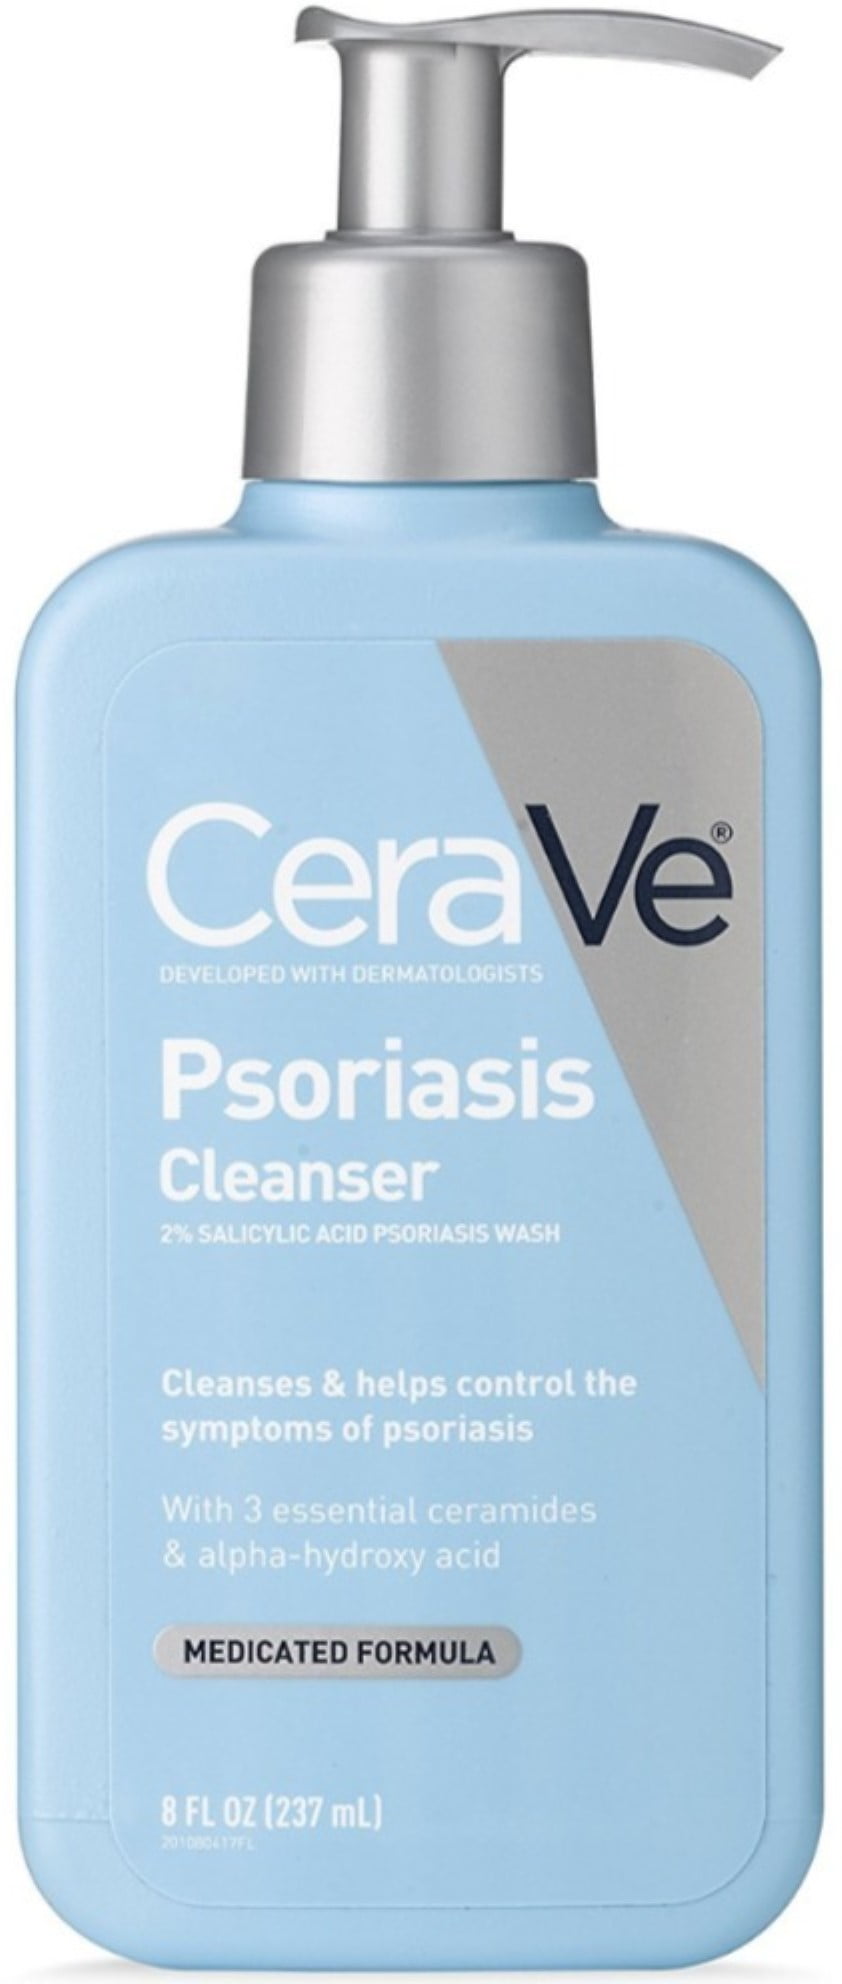 cerave psoriasis cleanser review